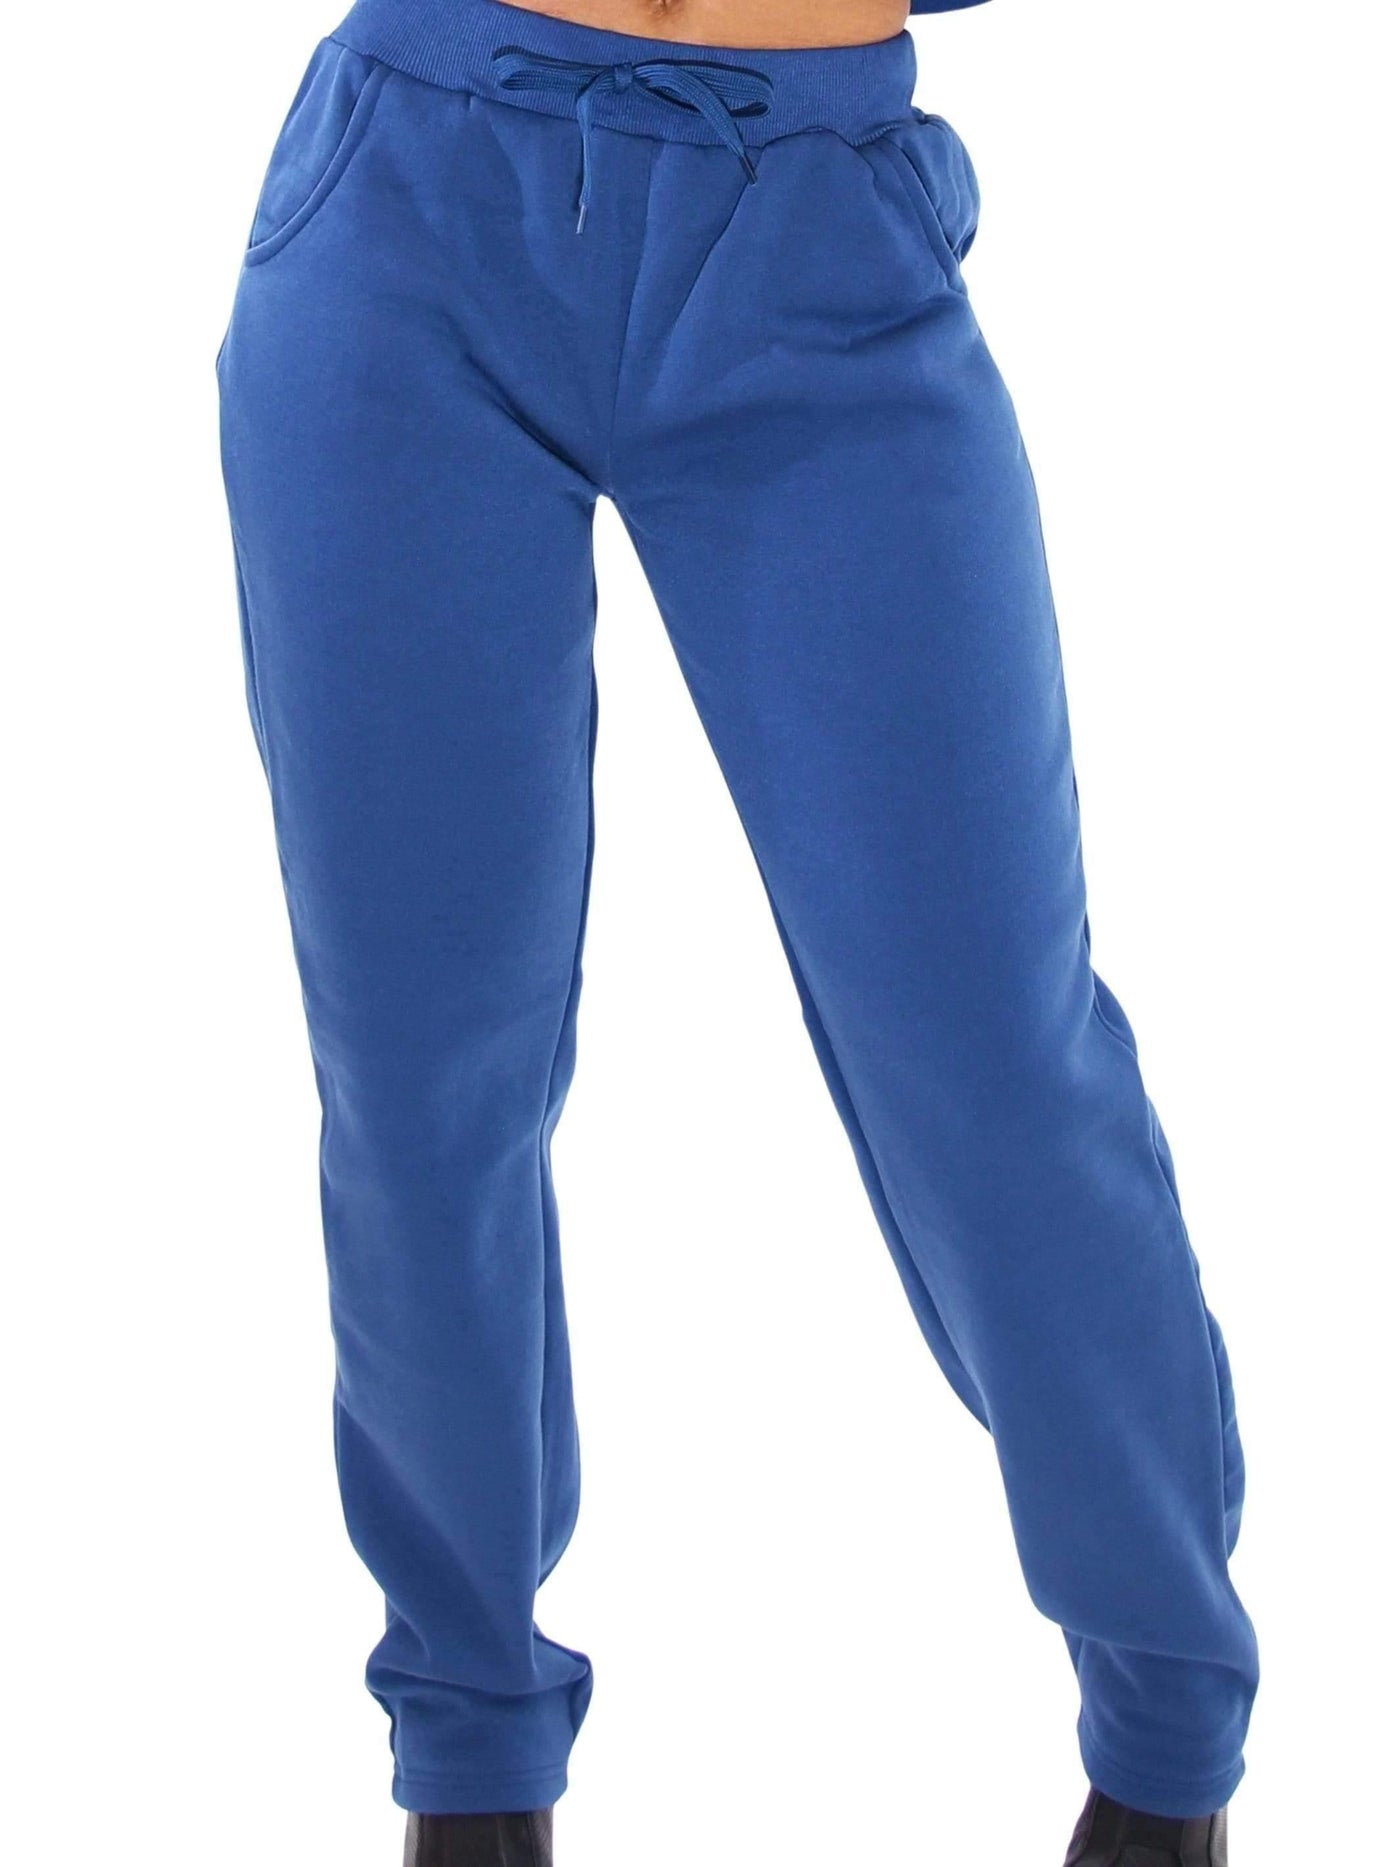 Statement Lounge Comfy Bee | 2 Piece Sweat Suit Blue Statement Piece NY